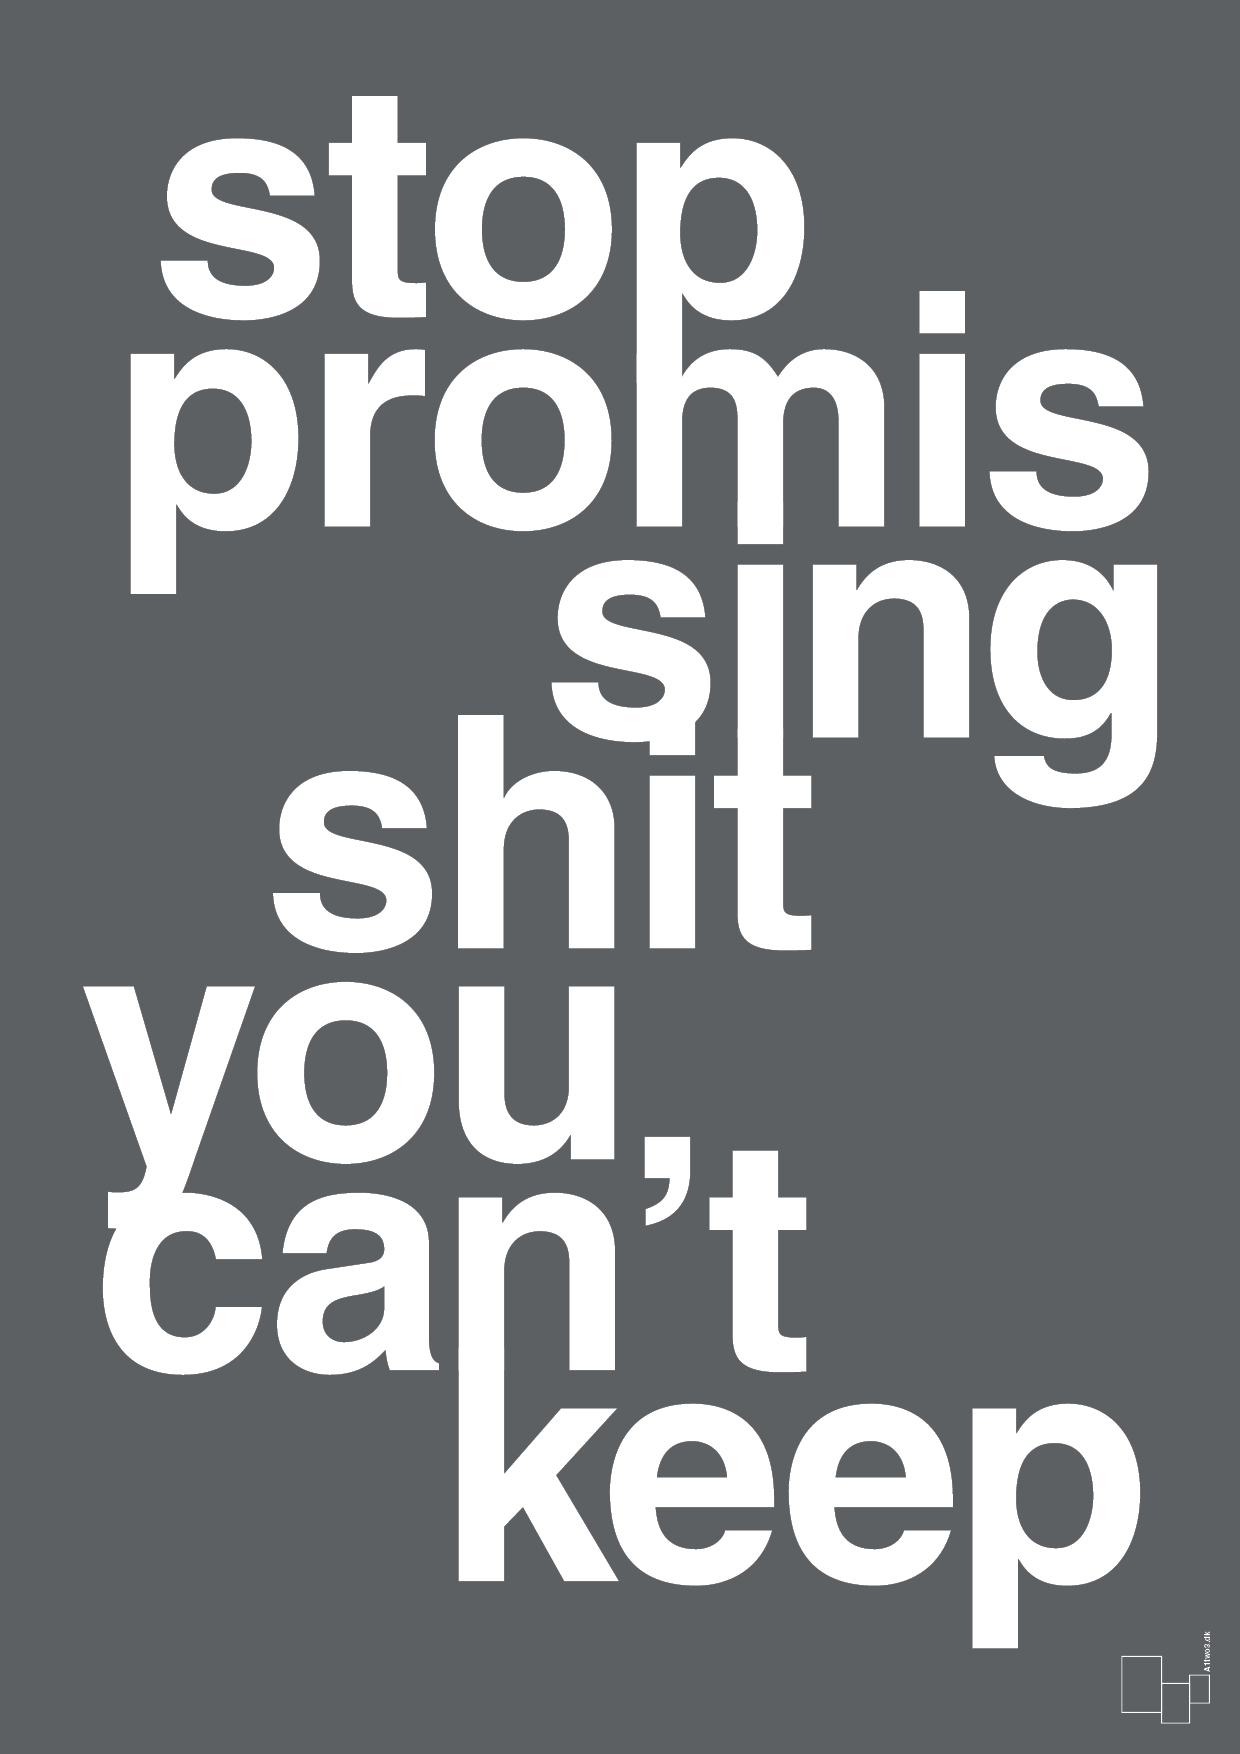 stop promissing shit you cant keep - Plakat med Ordsprog i Graphic Charcoal